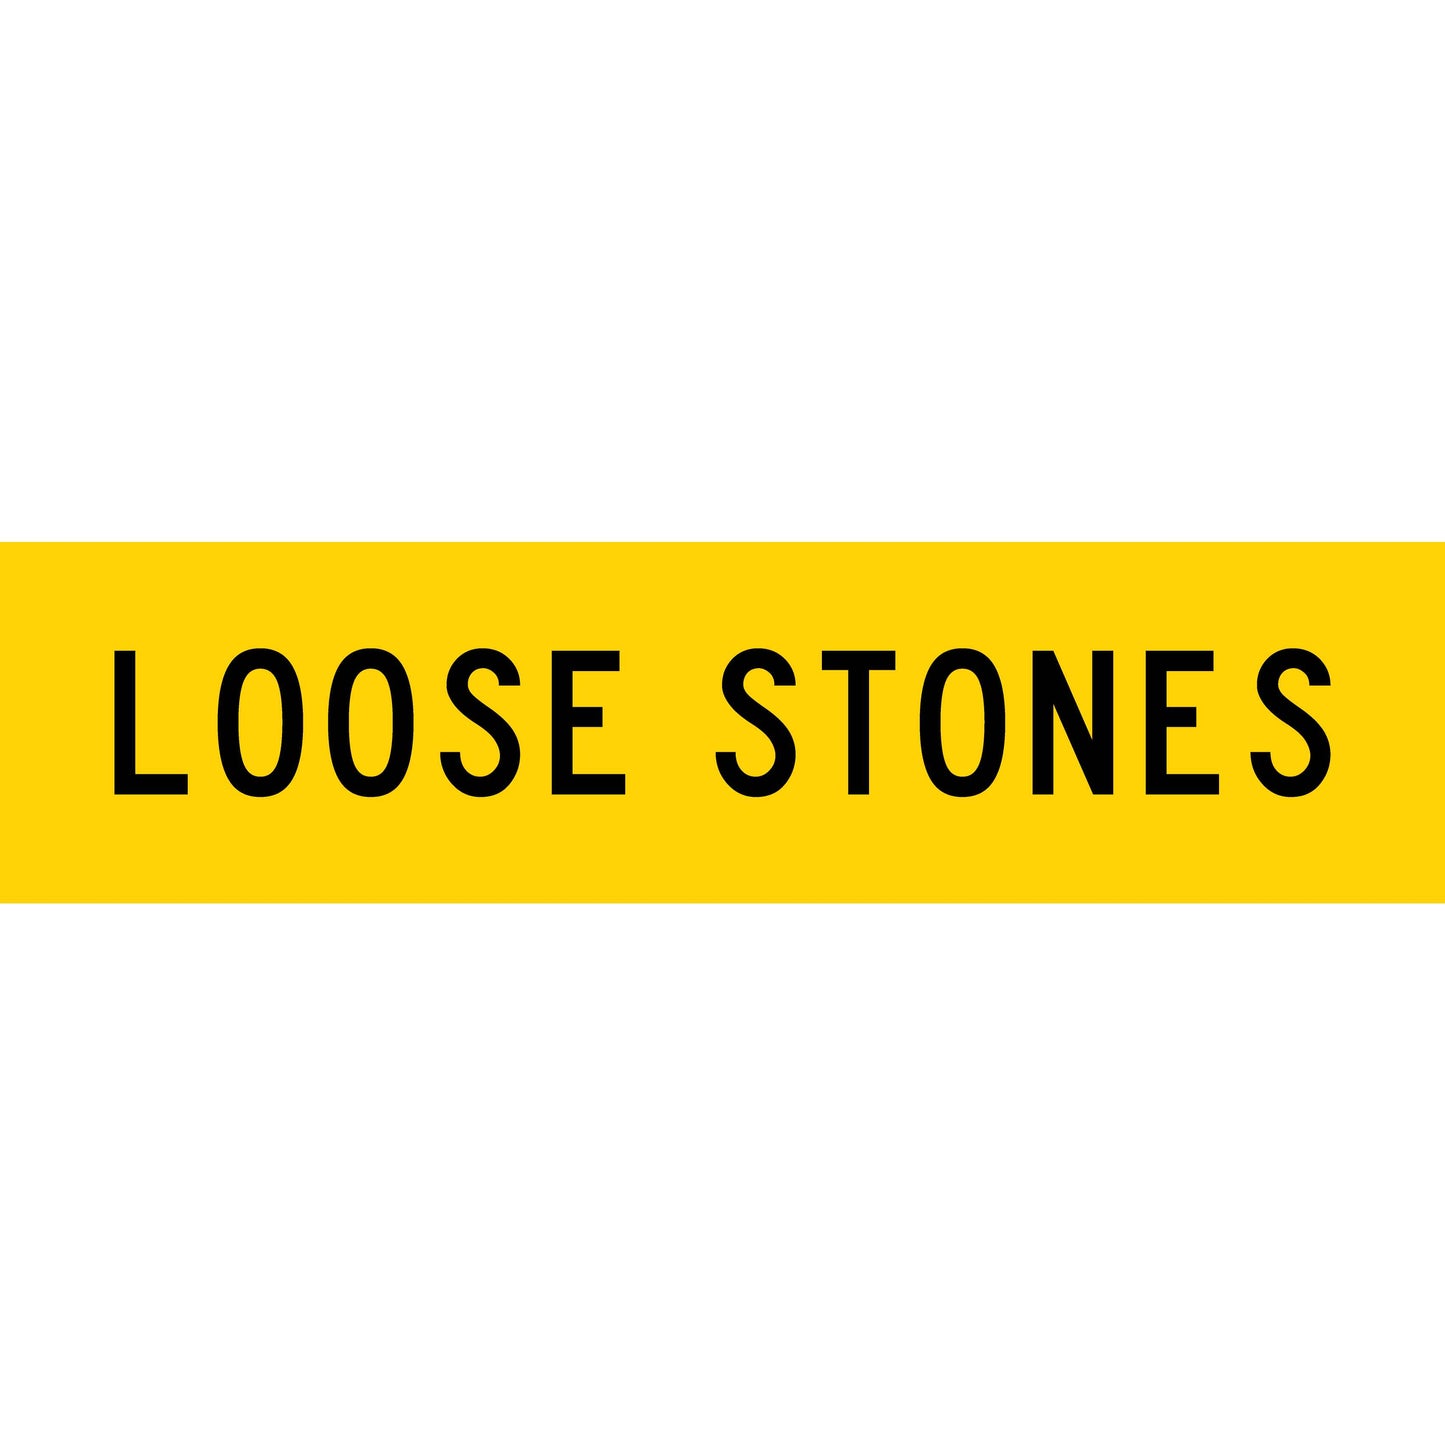 Loose Stones Long Skinny Multi Message Reflective Traffic Sign